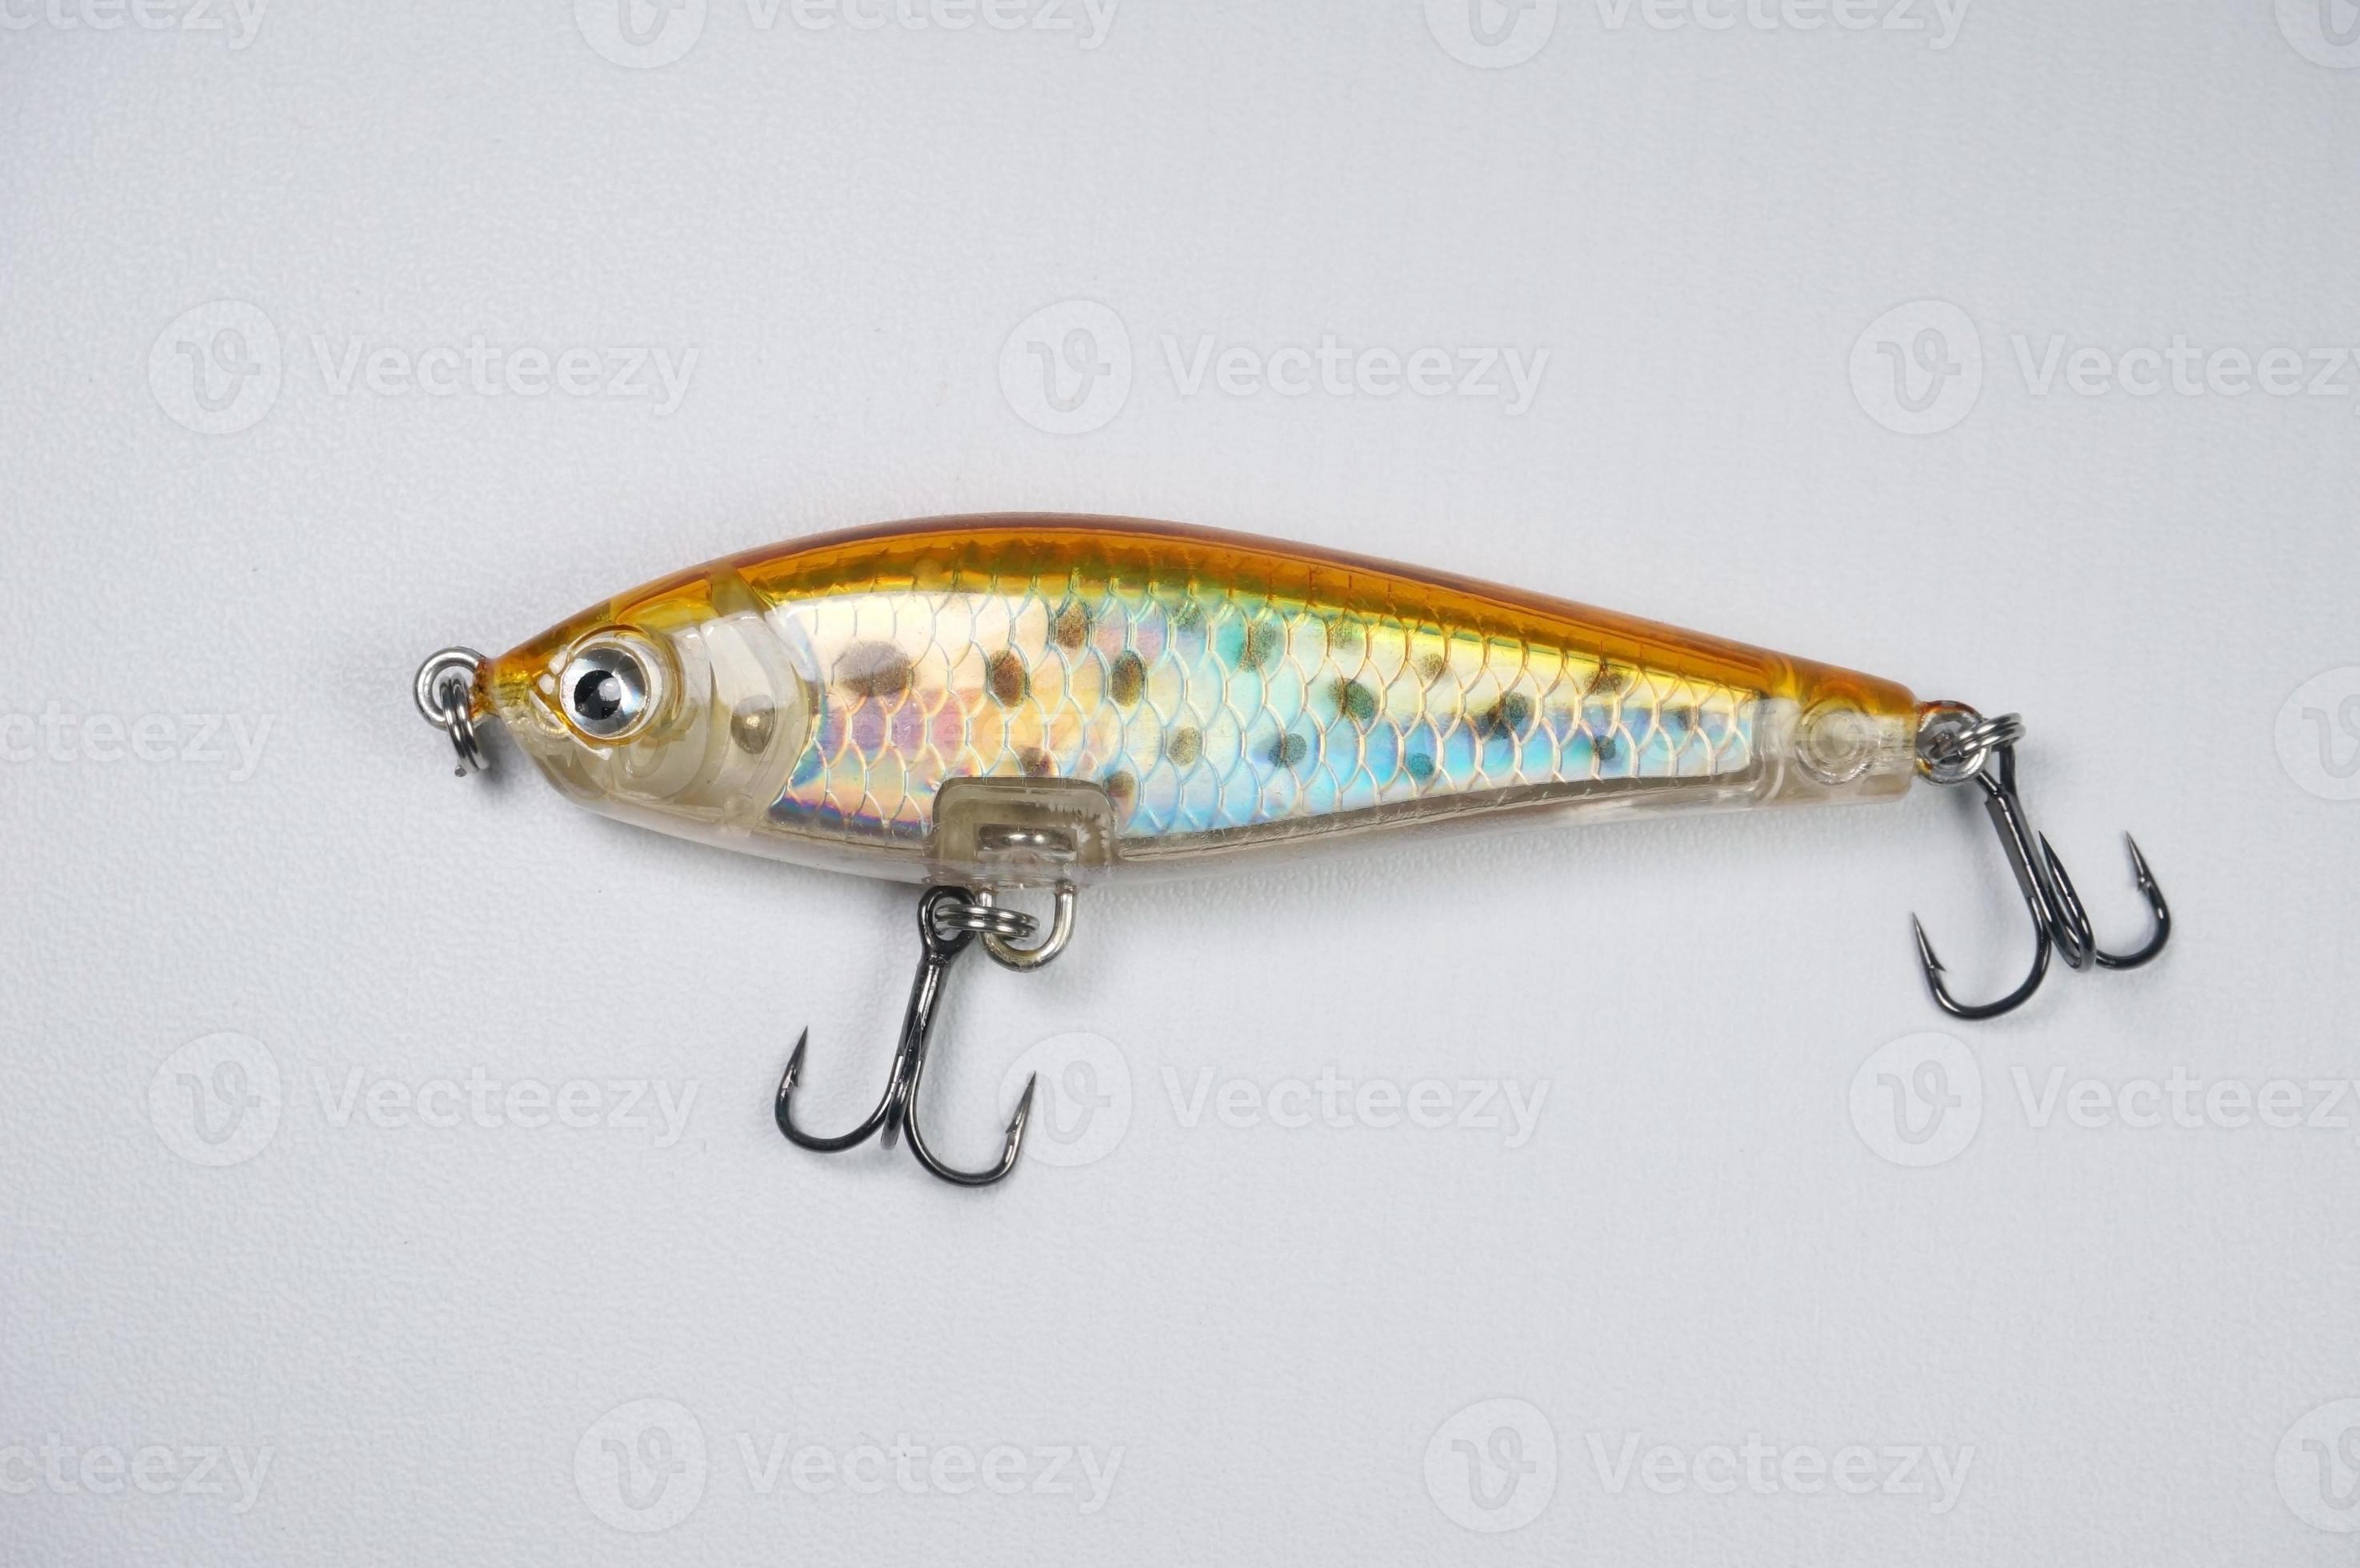 Plastic fishing lure on a white background, Lure floating 14199478